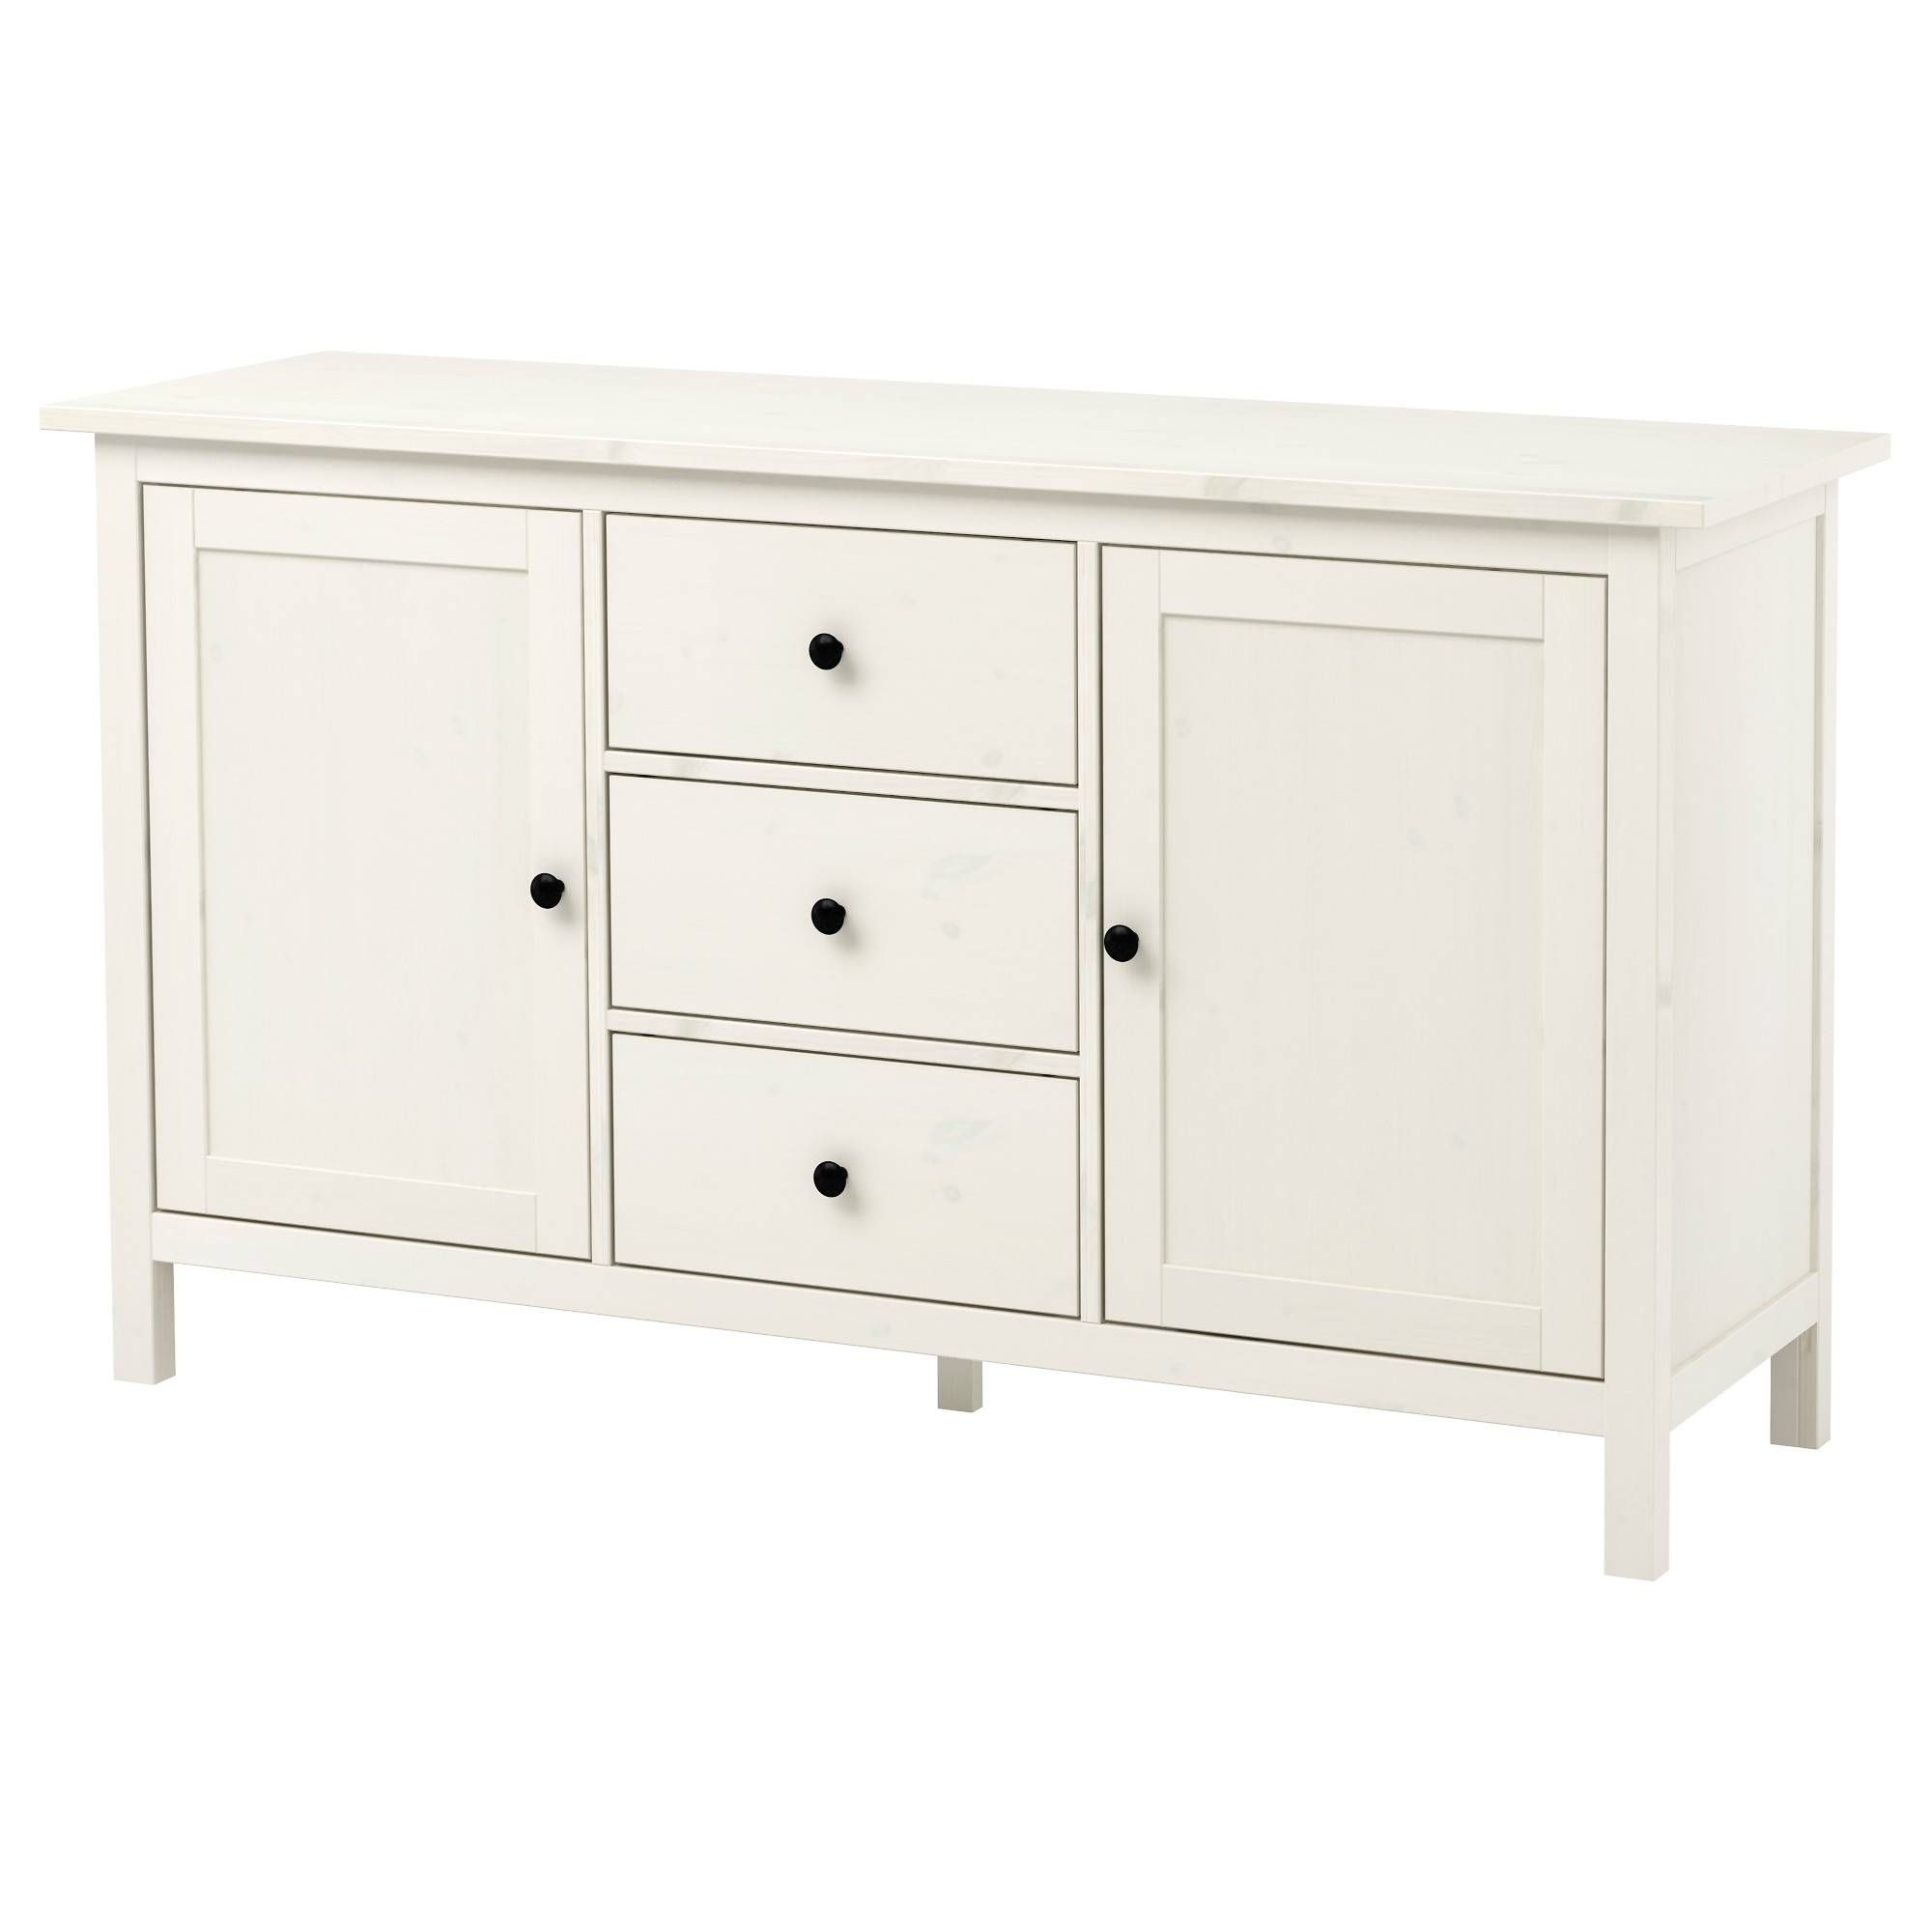 Hemnes Sideboard – White Stain – Ikea In Tall Narrow Sideboards (View 2 of 15)